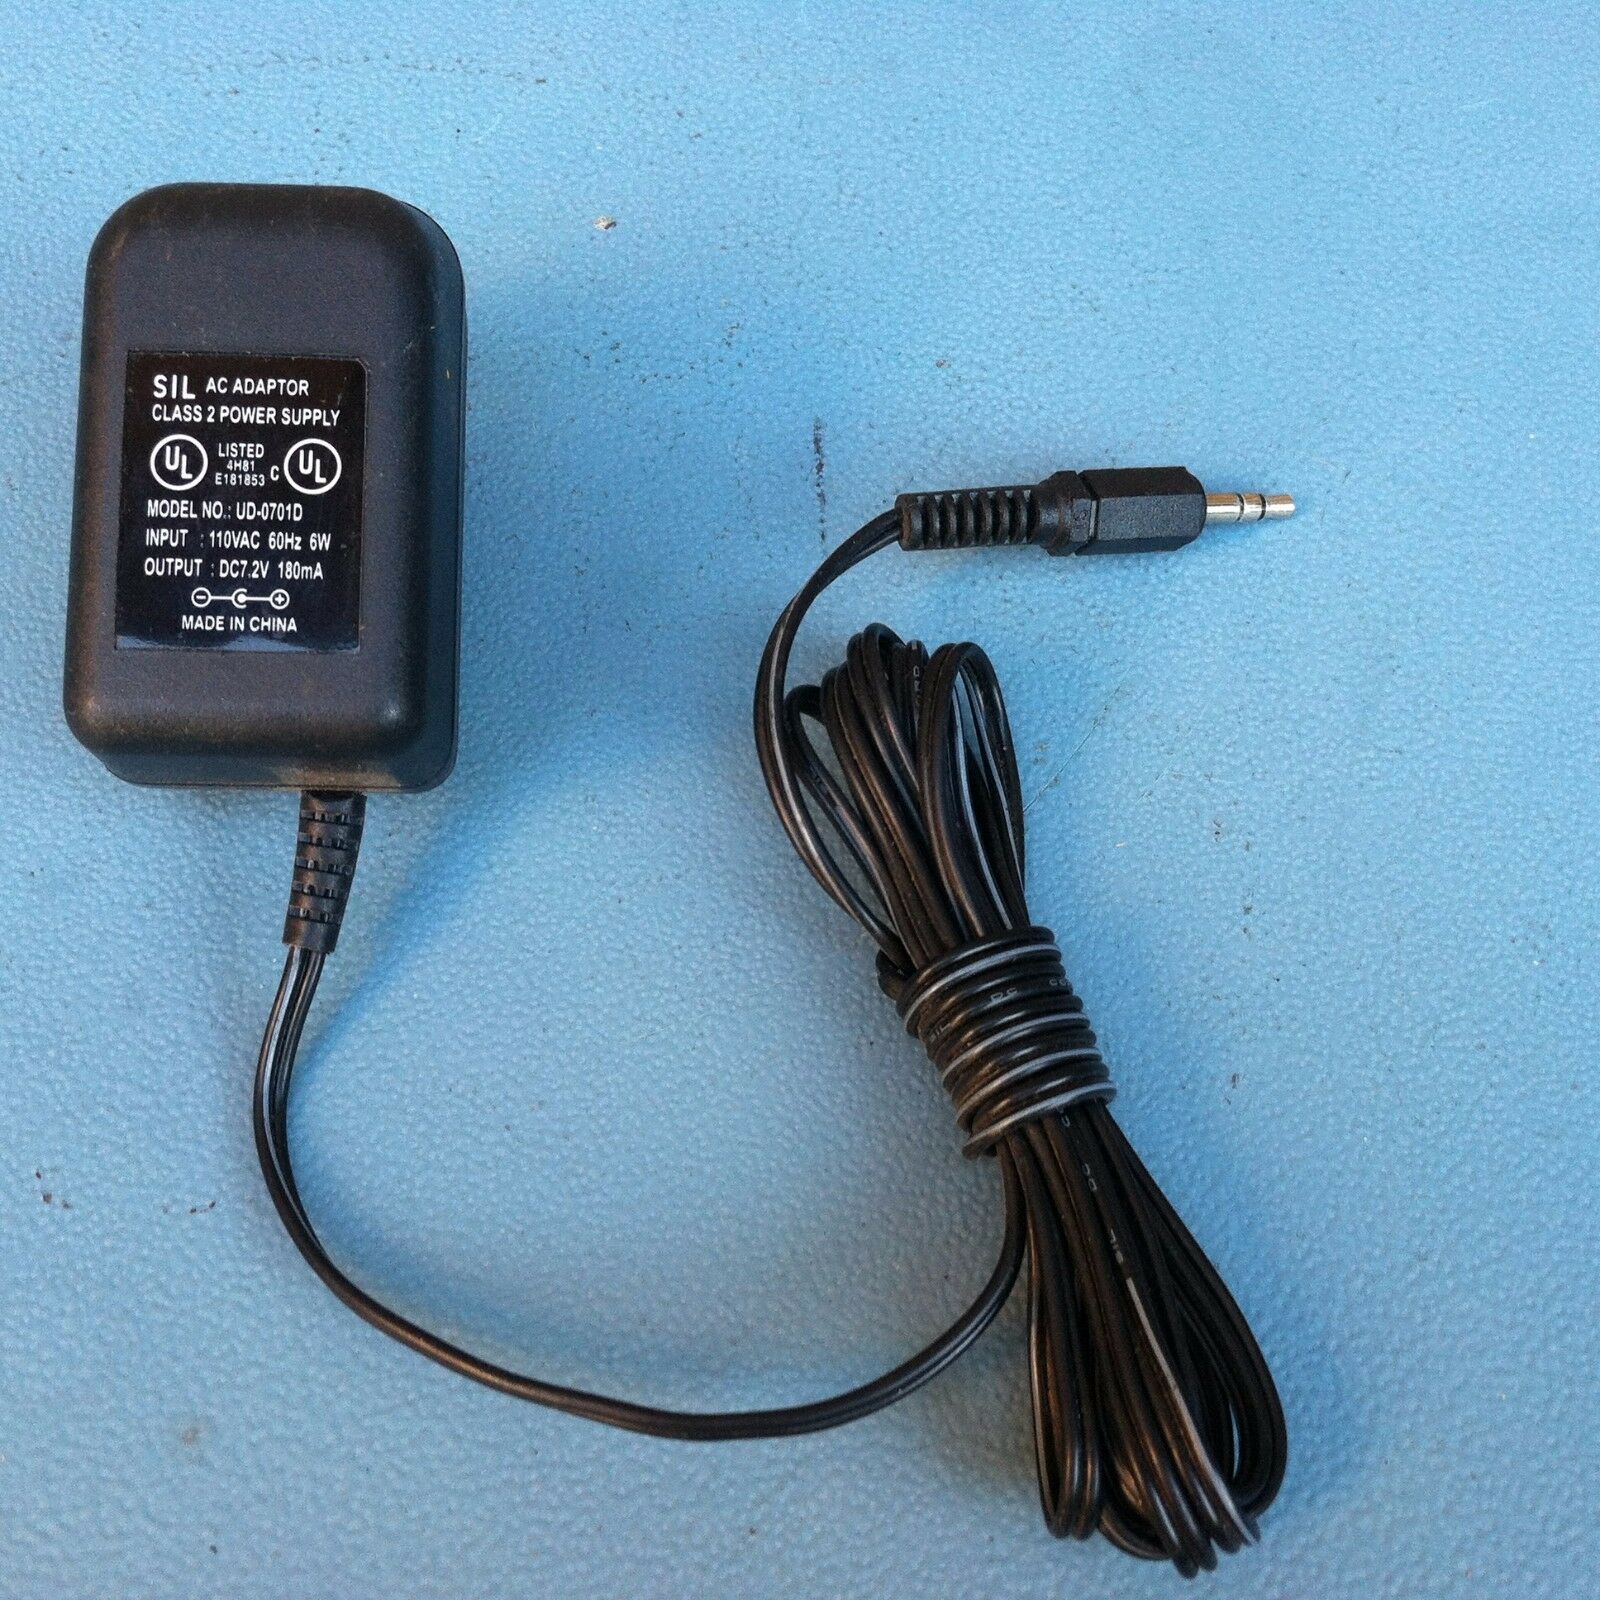 New 7.2V 180mA SIL UD-0701D Class 2 Transformer Power Supply Ac Adapter